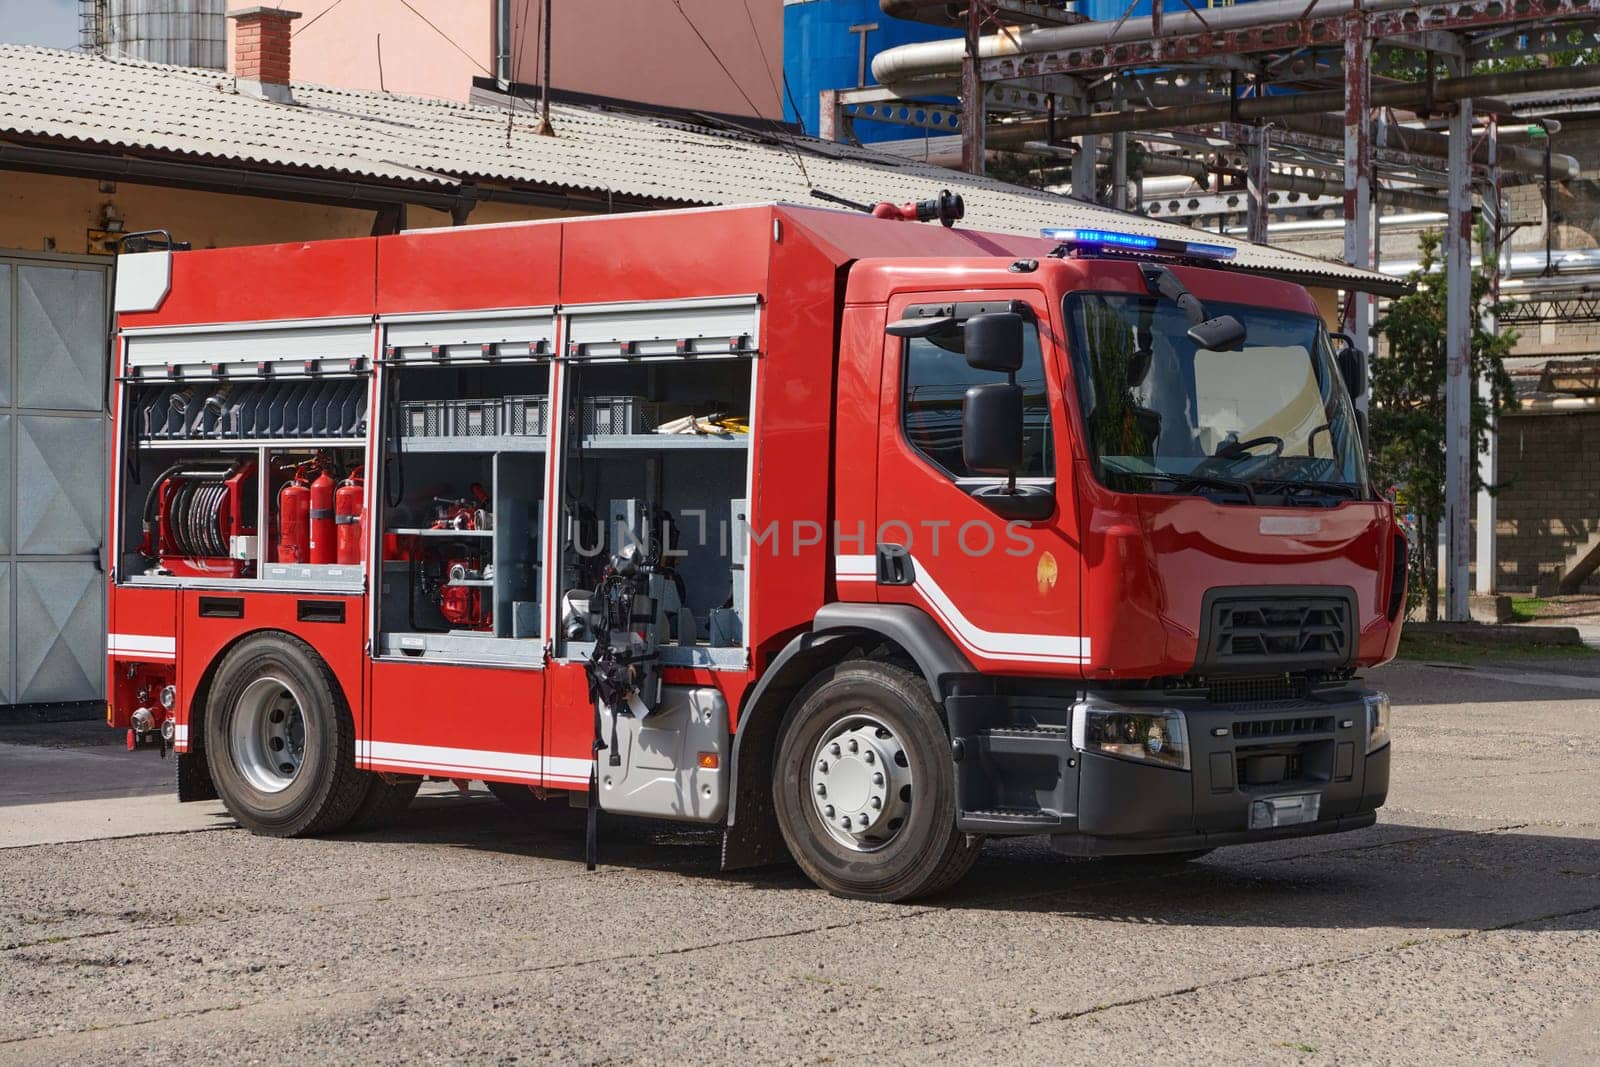 A state-of-the-art firetruck, equipped with advanced rescue technology, stands ready with its skilled firefighting team, prepared to intervene and respond rapidly to emergencies, ensuring the safety and protection of the community by dotshock